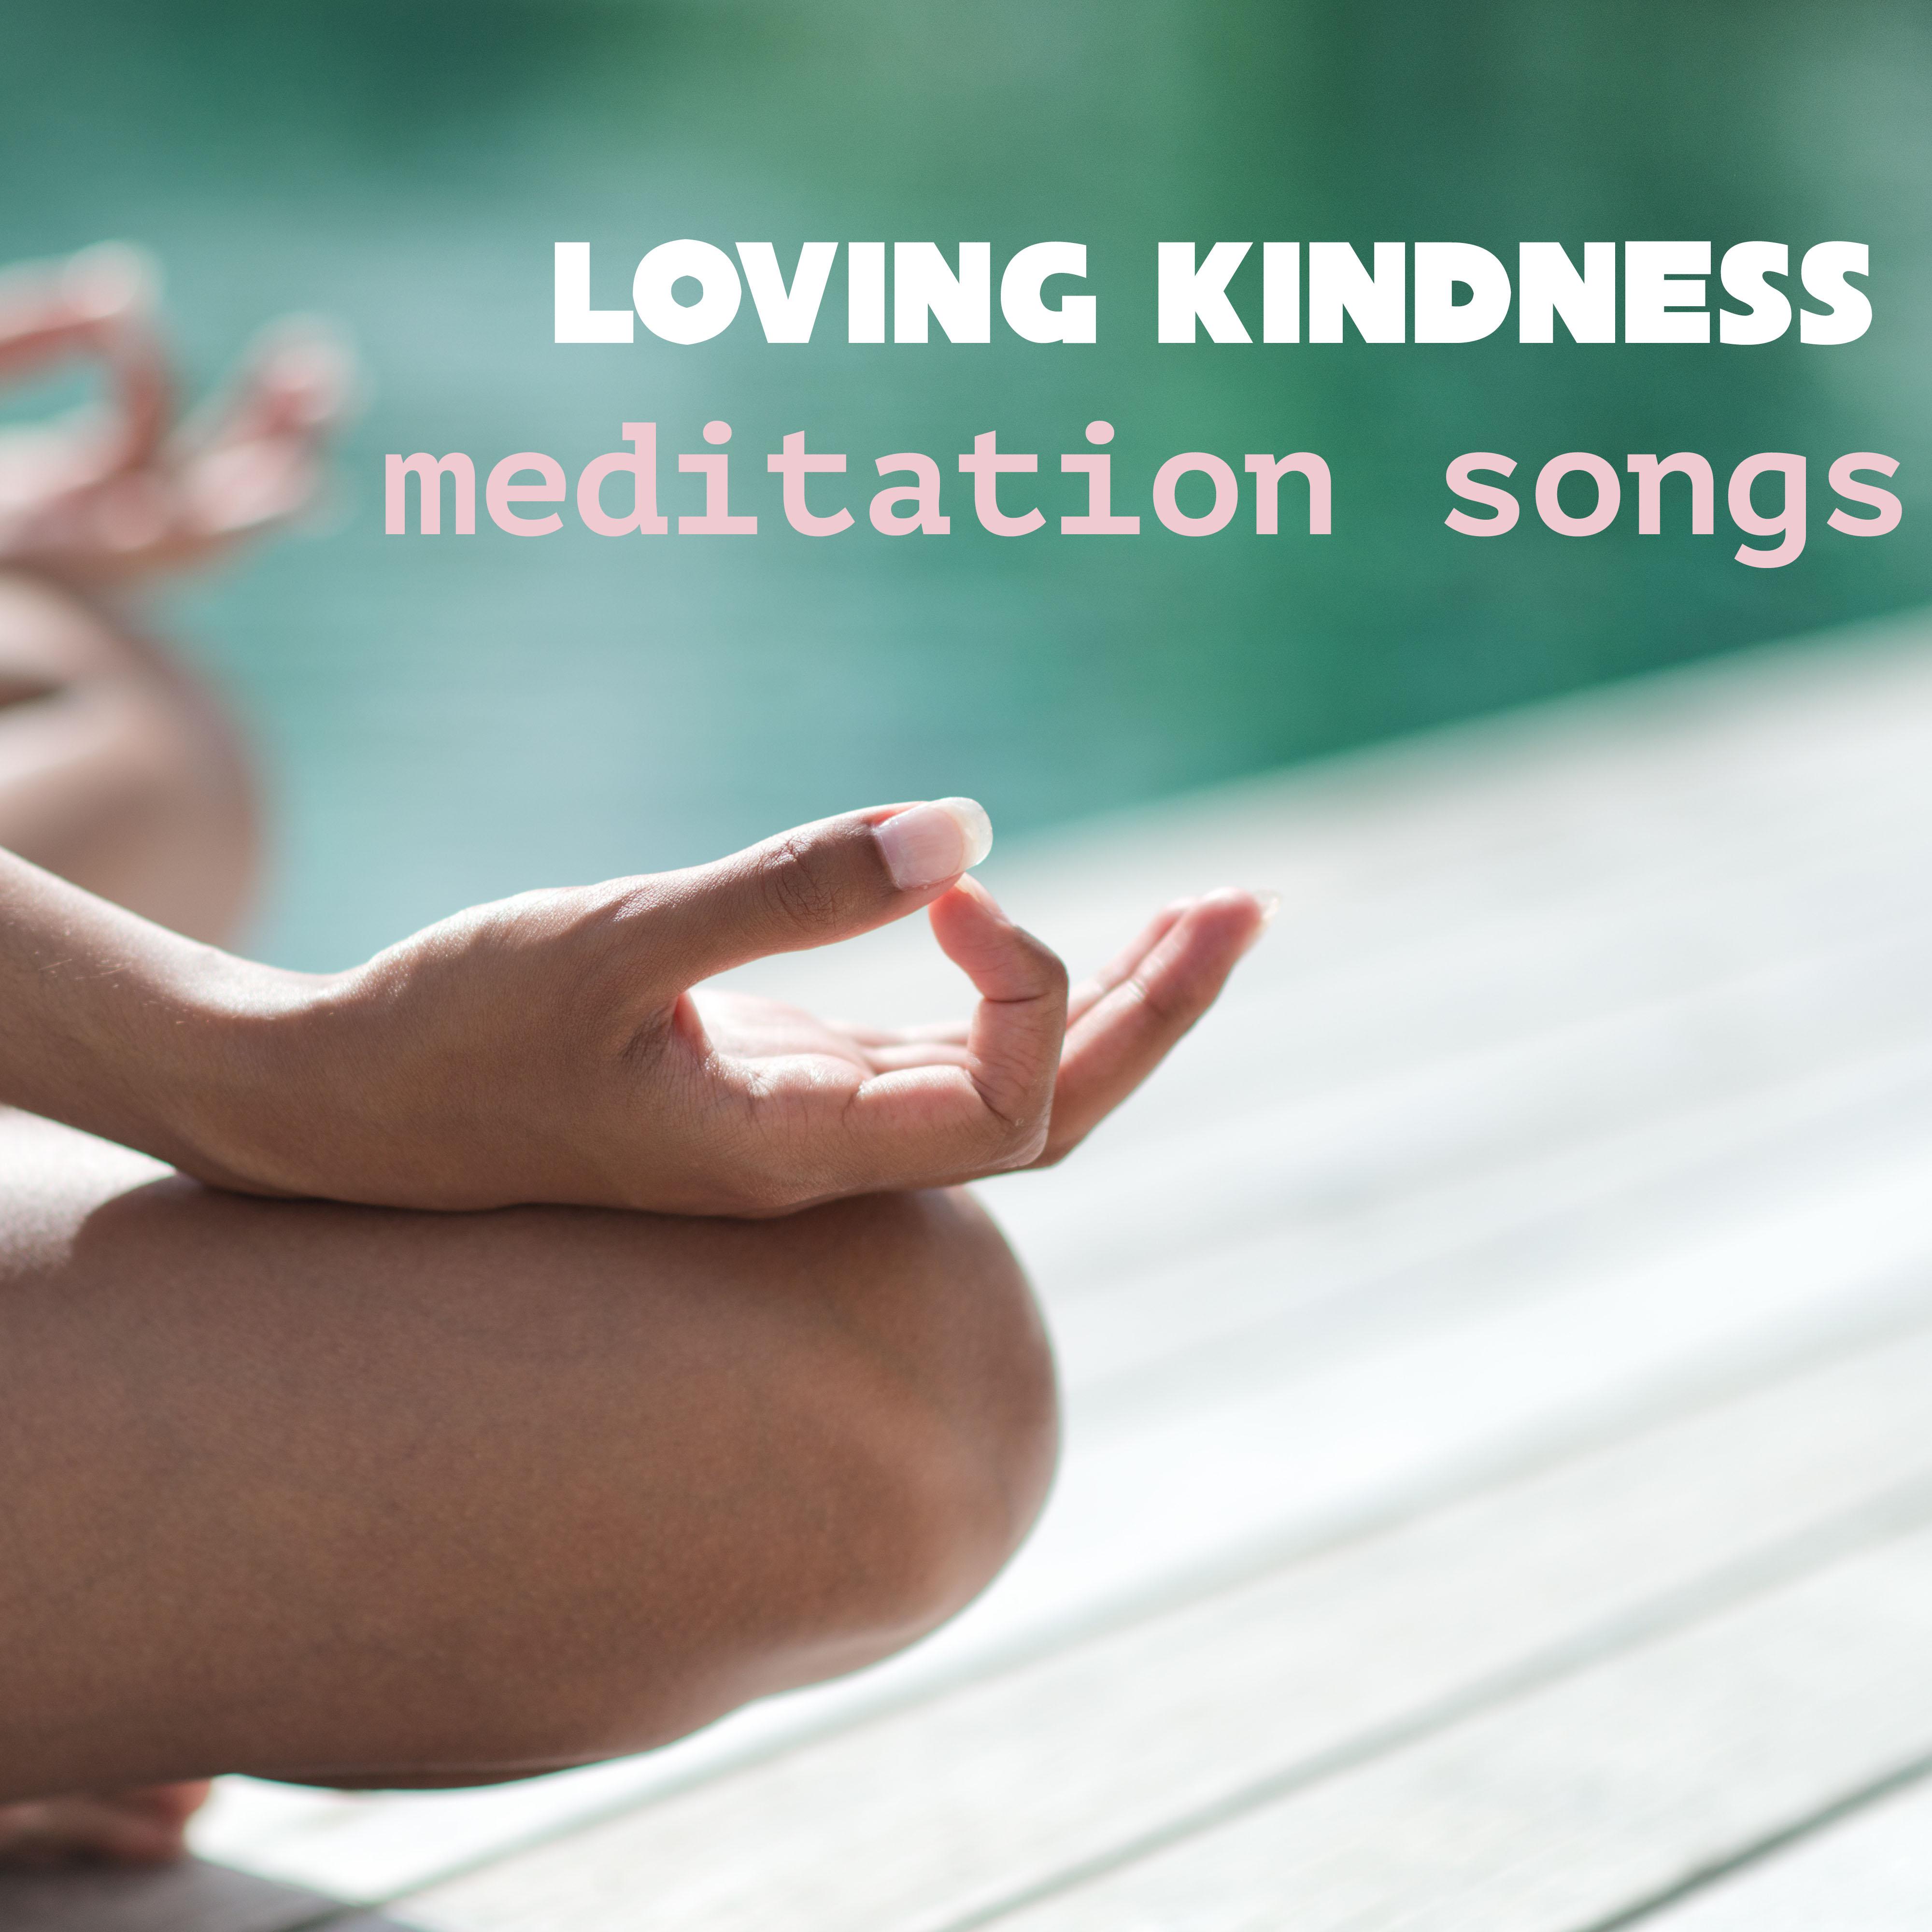 Loving Kindness Meditation Songs - Music to Meditate Deeply for Your Loved Ones